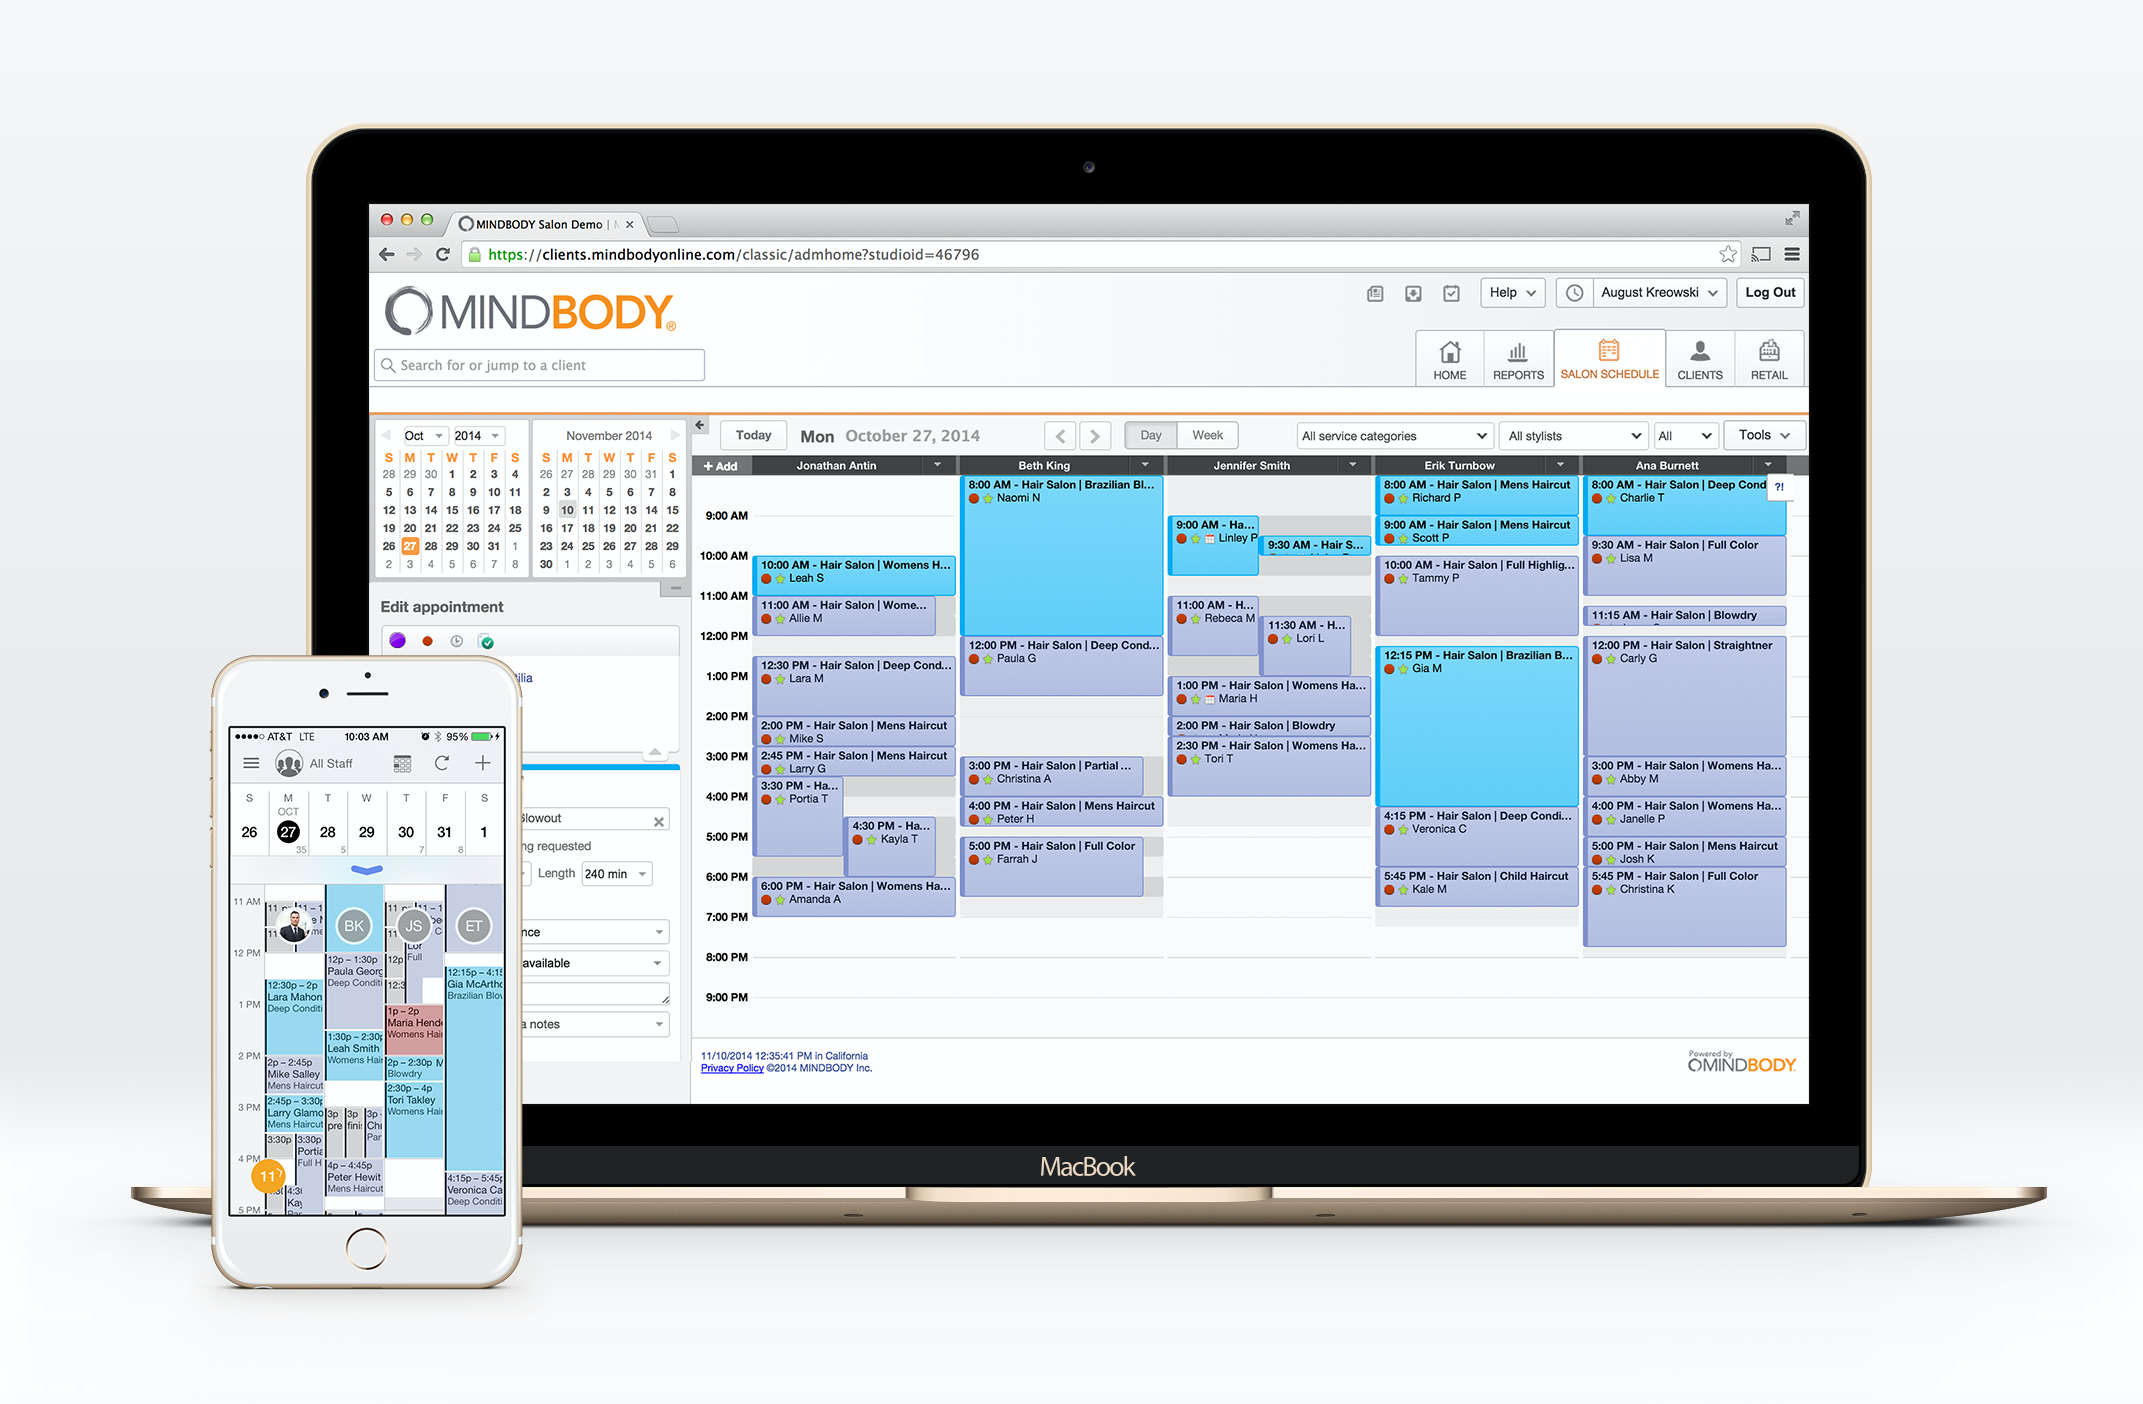 Mindbody Software - Check and manage schedules easily through a color-coded calendar